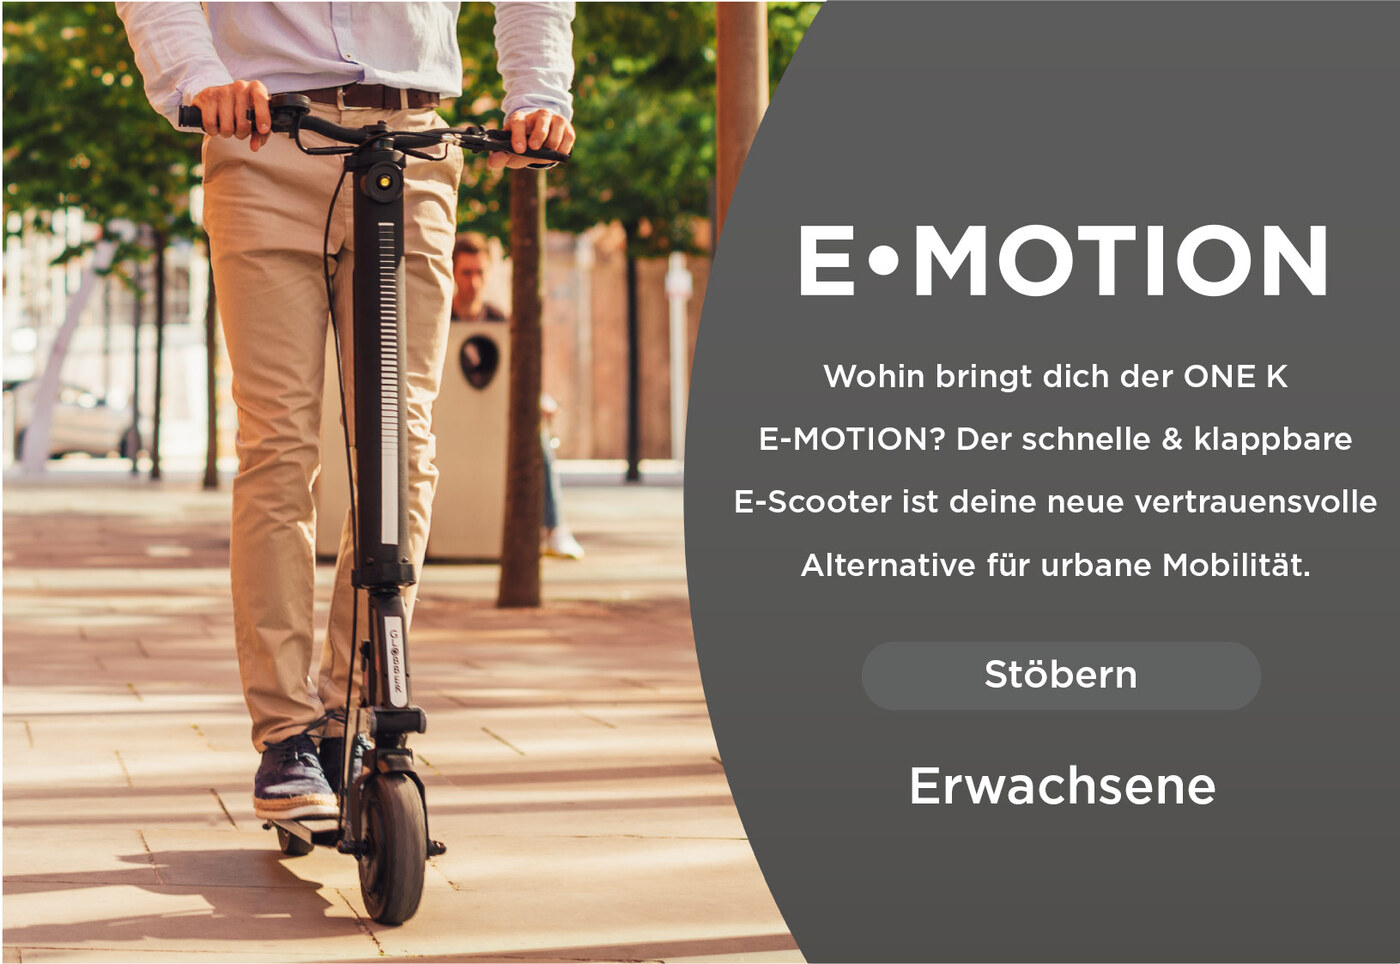 Where will ONE K E-MOTION electric scooter take you? It’s a fast & foldable e-scooter to be the best reliable alternative for urban mobility.